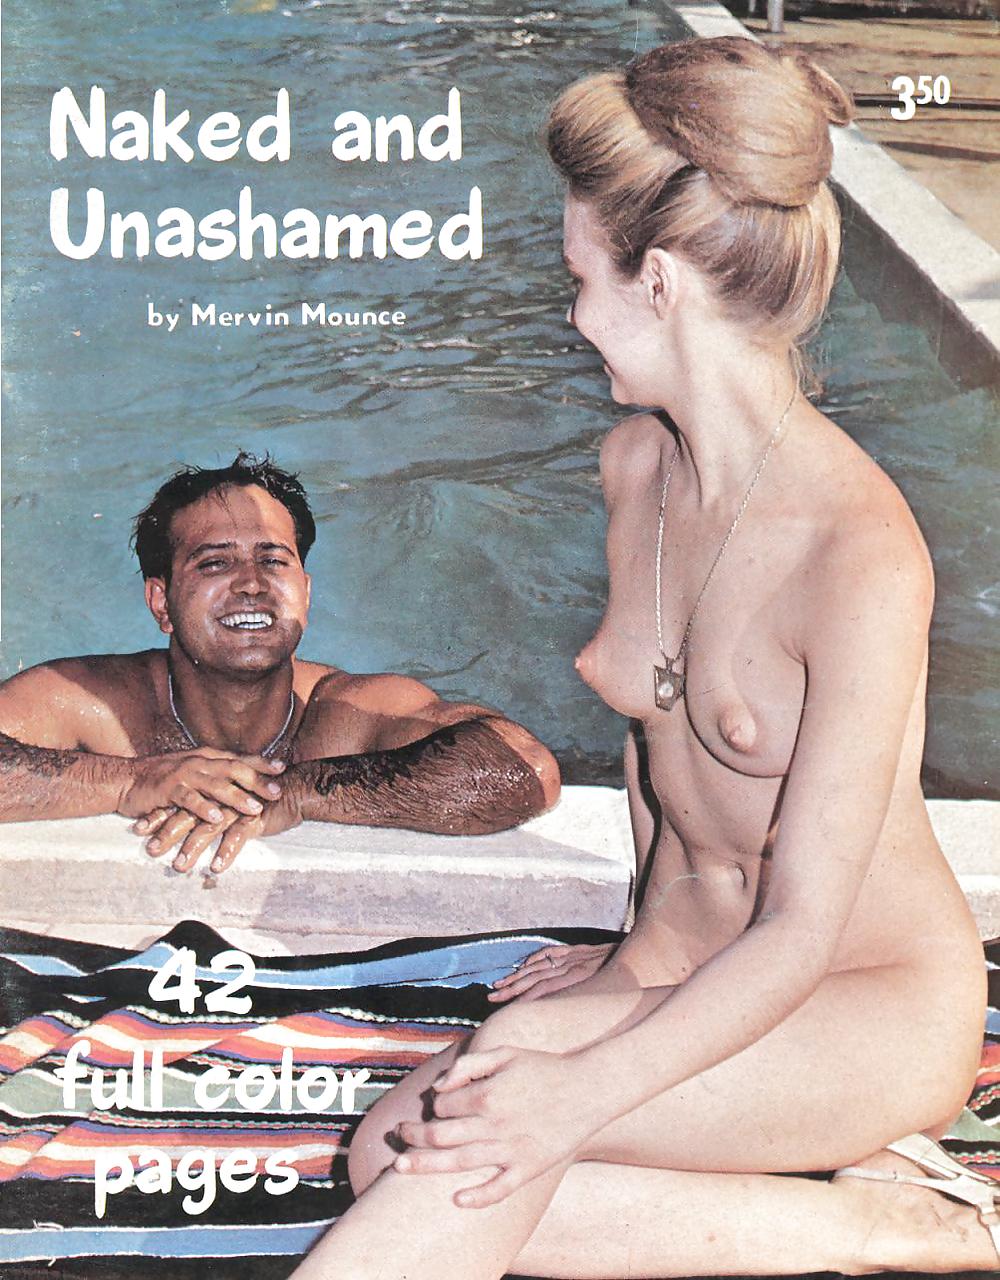 Vintage Naked Nudist - Naked and Unashamed - Vintage Nudist Mag Porn Pictures, XXX Photos, Sex  Images #1354502 - PICTOA